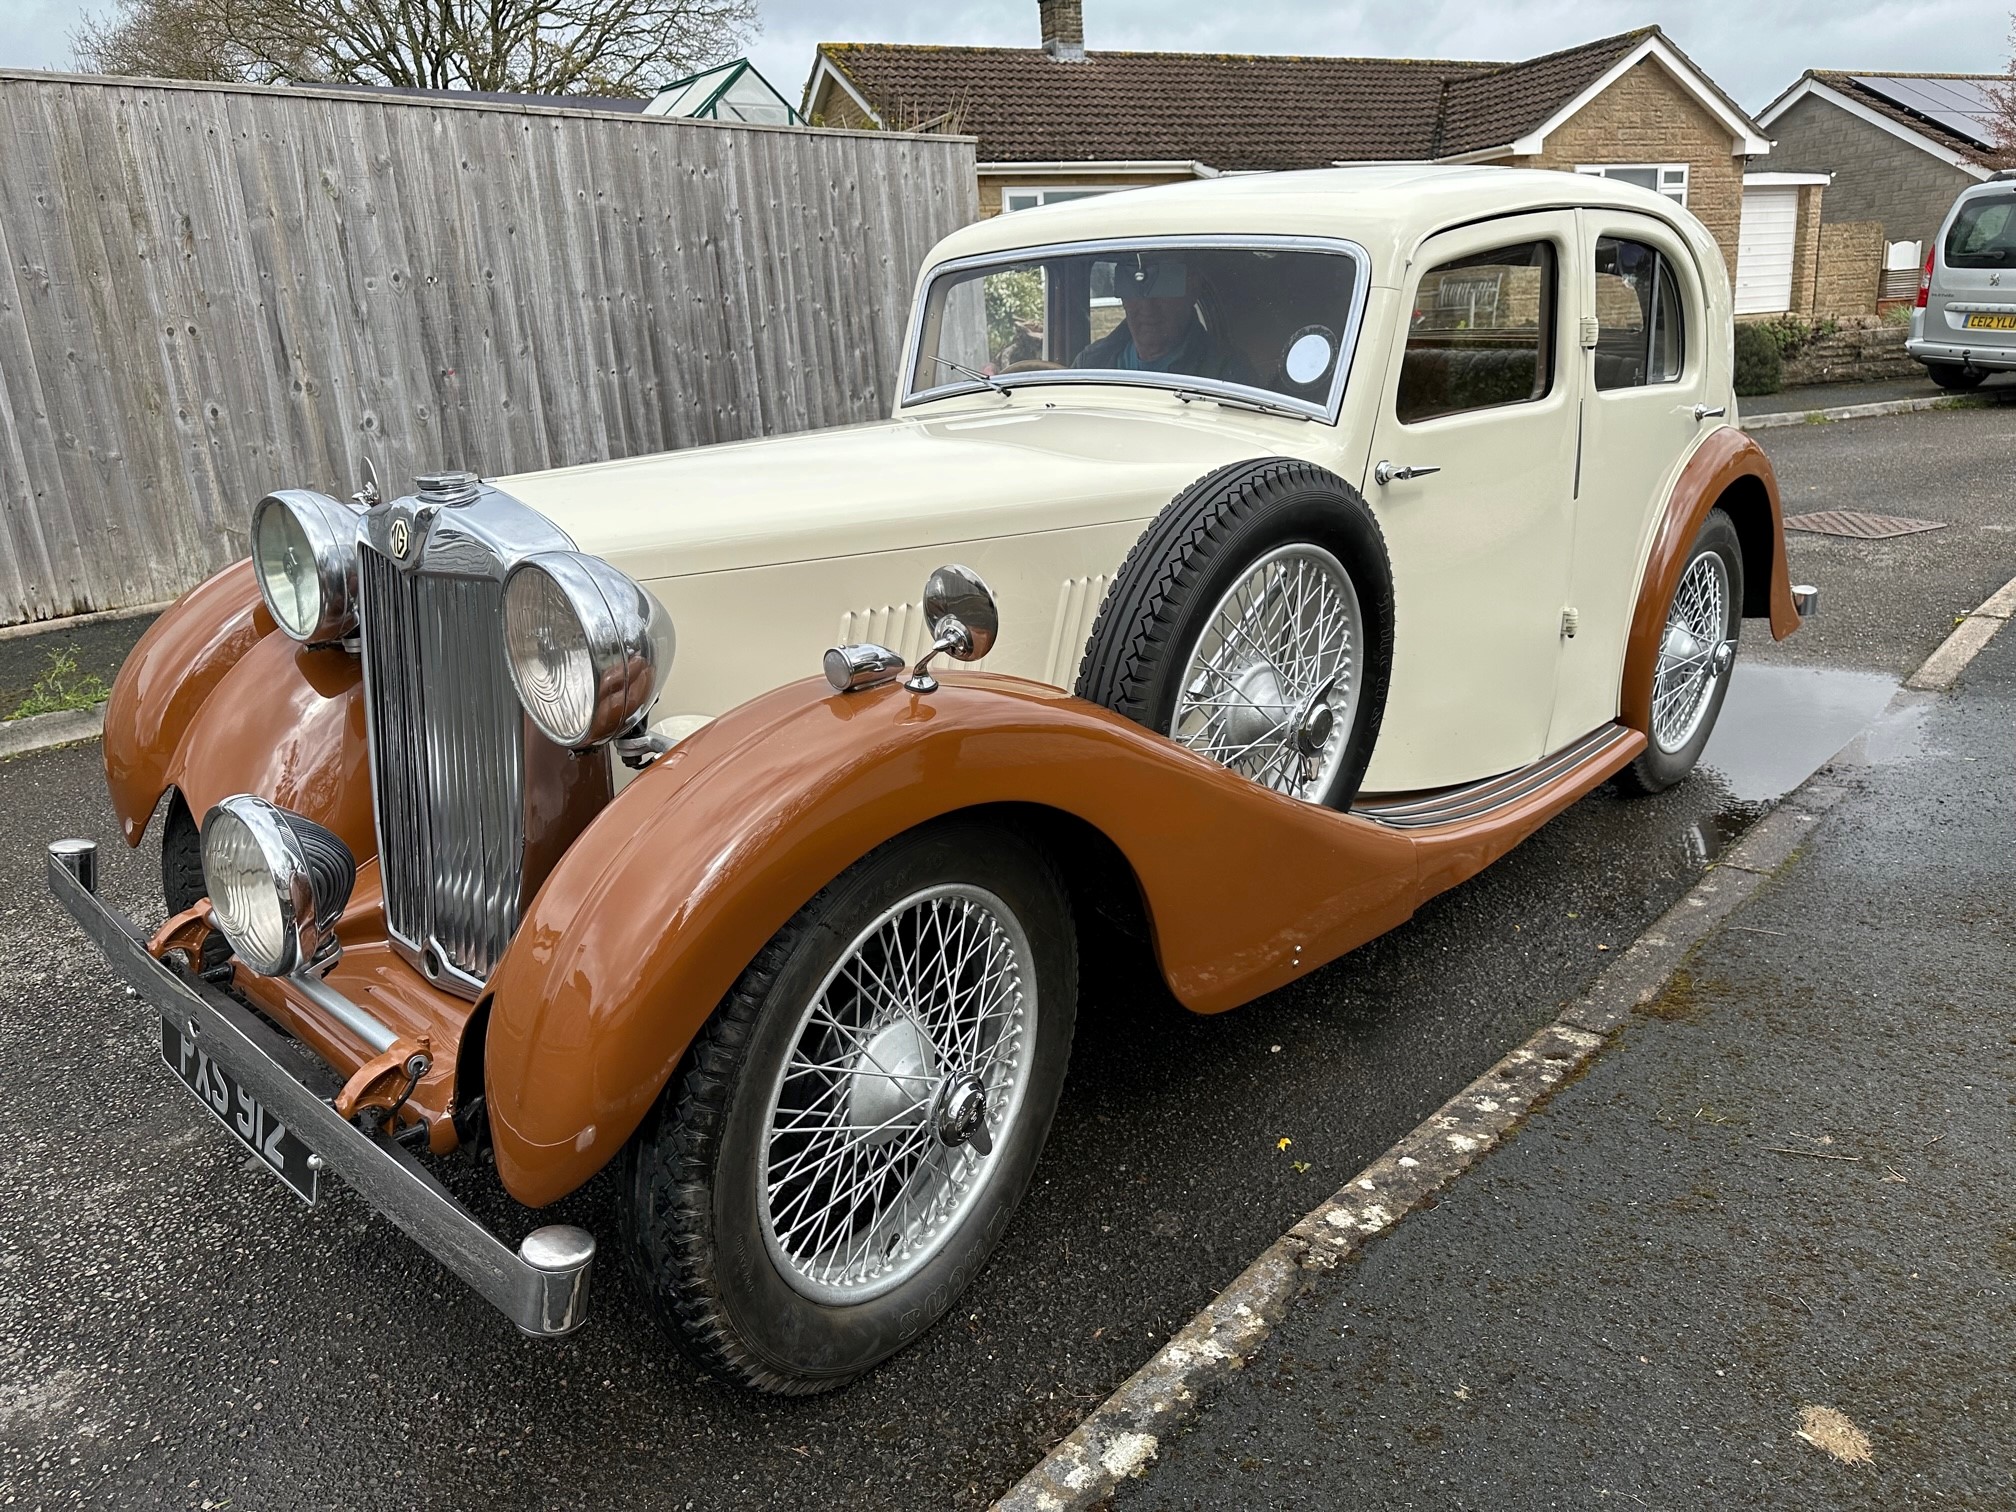 The 1939 MG VA has now been restored and is ready for classic car shows